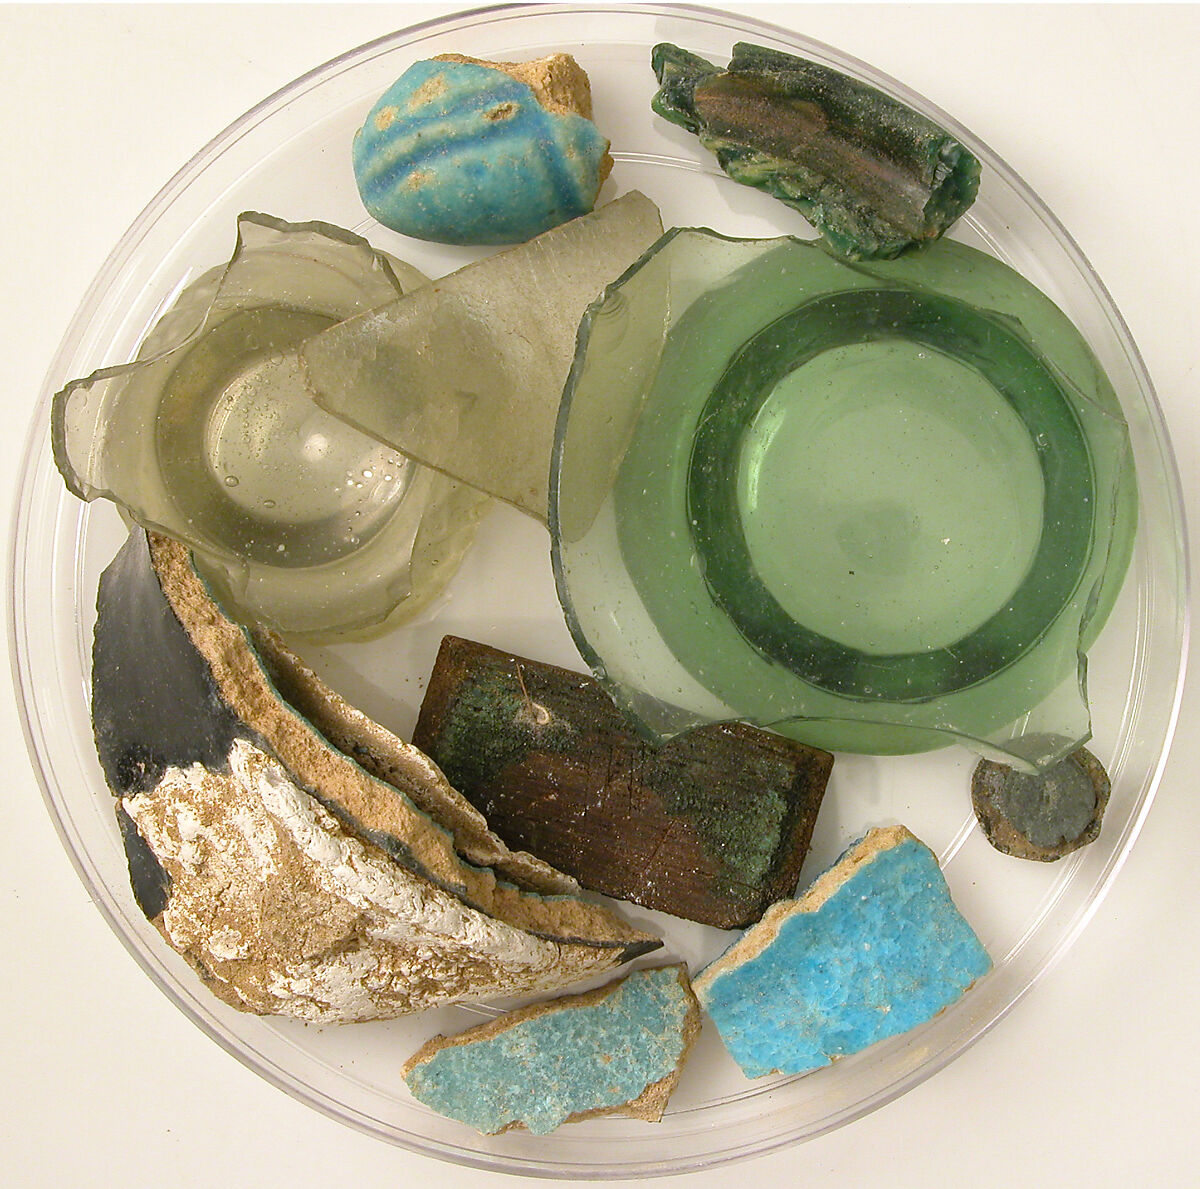 Fragments, Glass, wood, copper alloy, mortar and glazed earthenware (faience), Coptic 